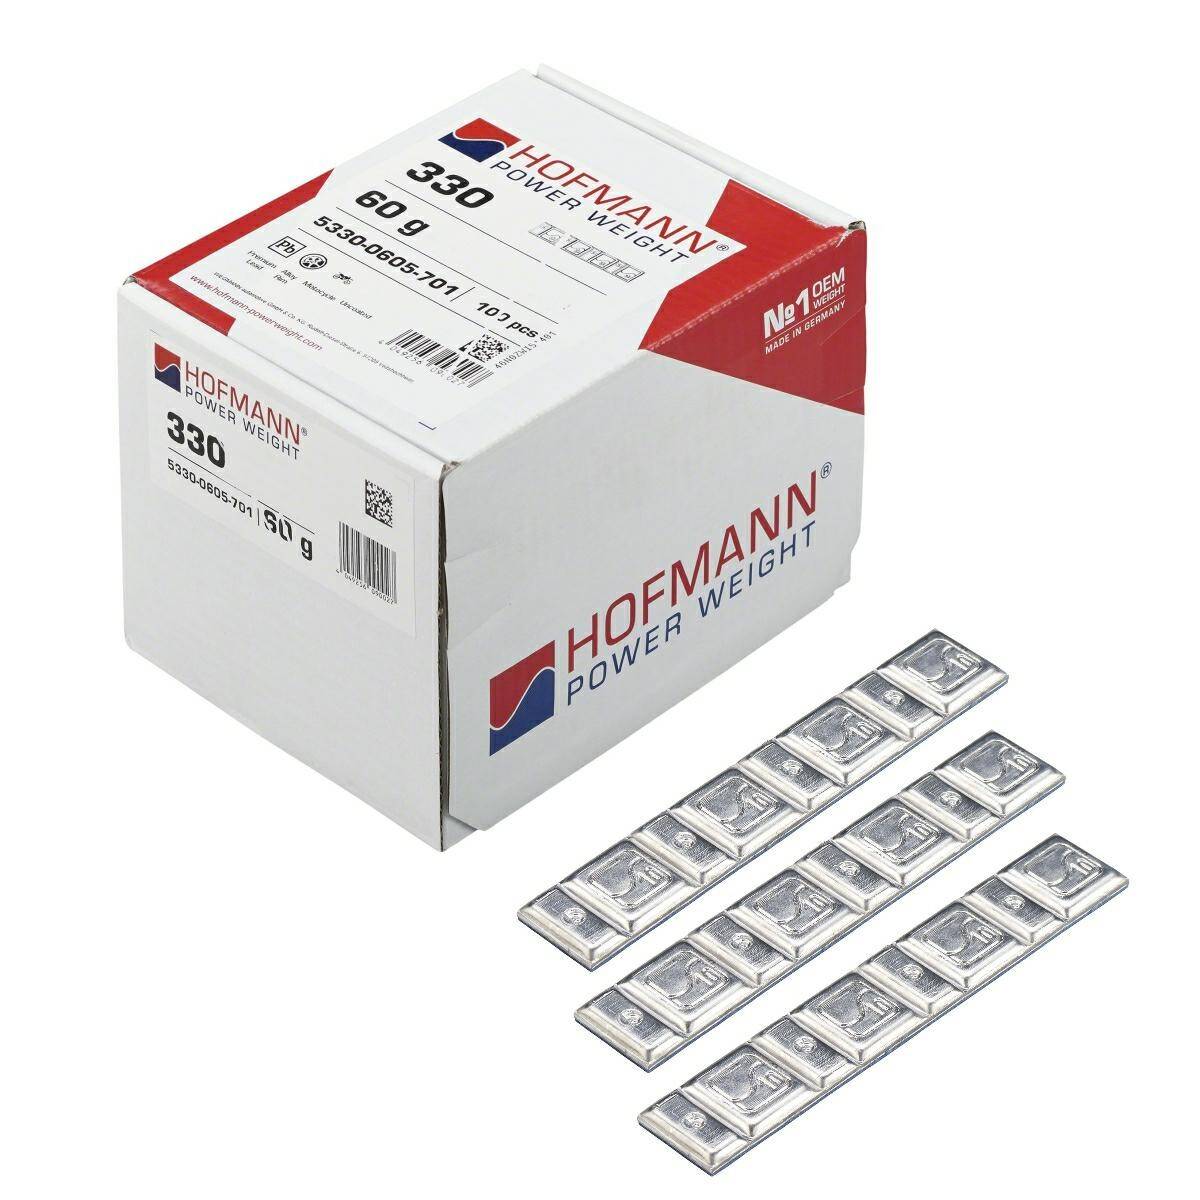 Adhesive Lead Weight  Hofmann Type H330-2/050 (Pb) 60g 4 x 5 and 4 x 10g - Pack of 50 (H330-2/050)